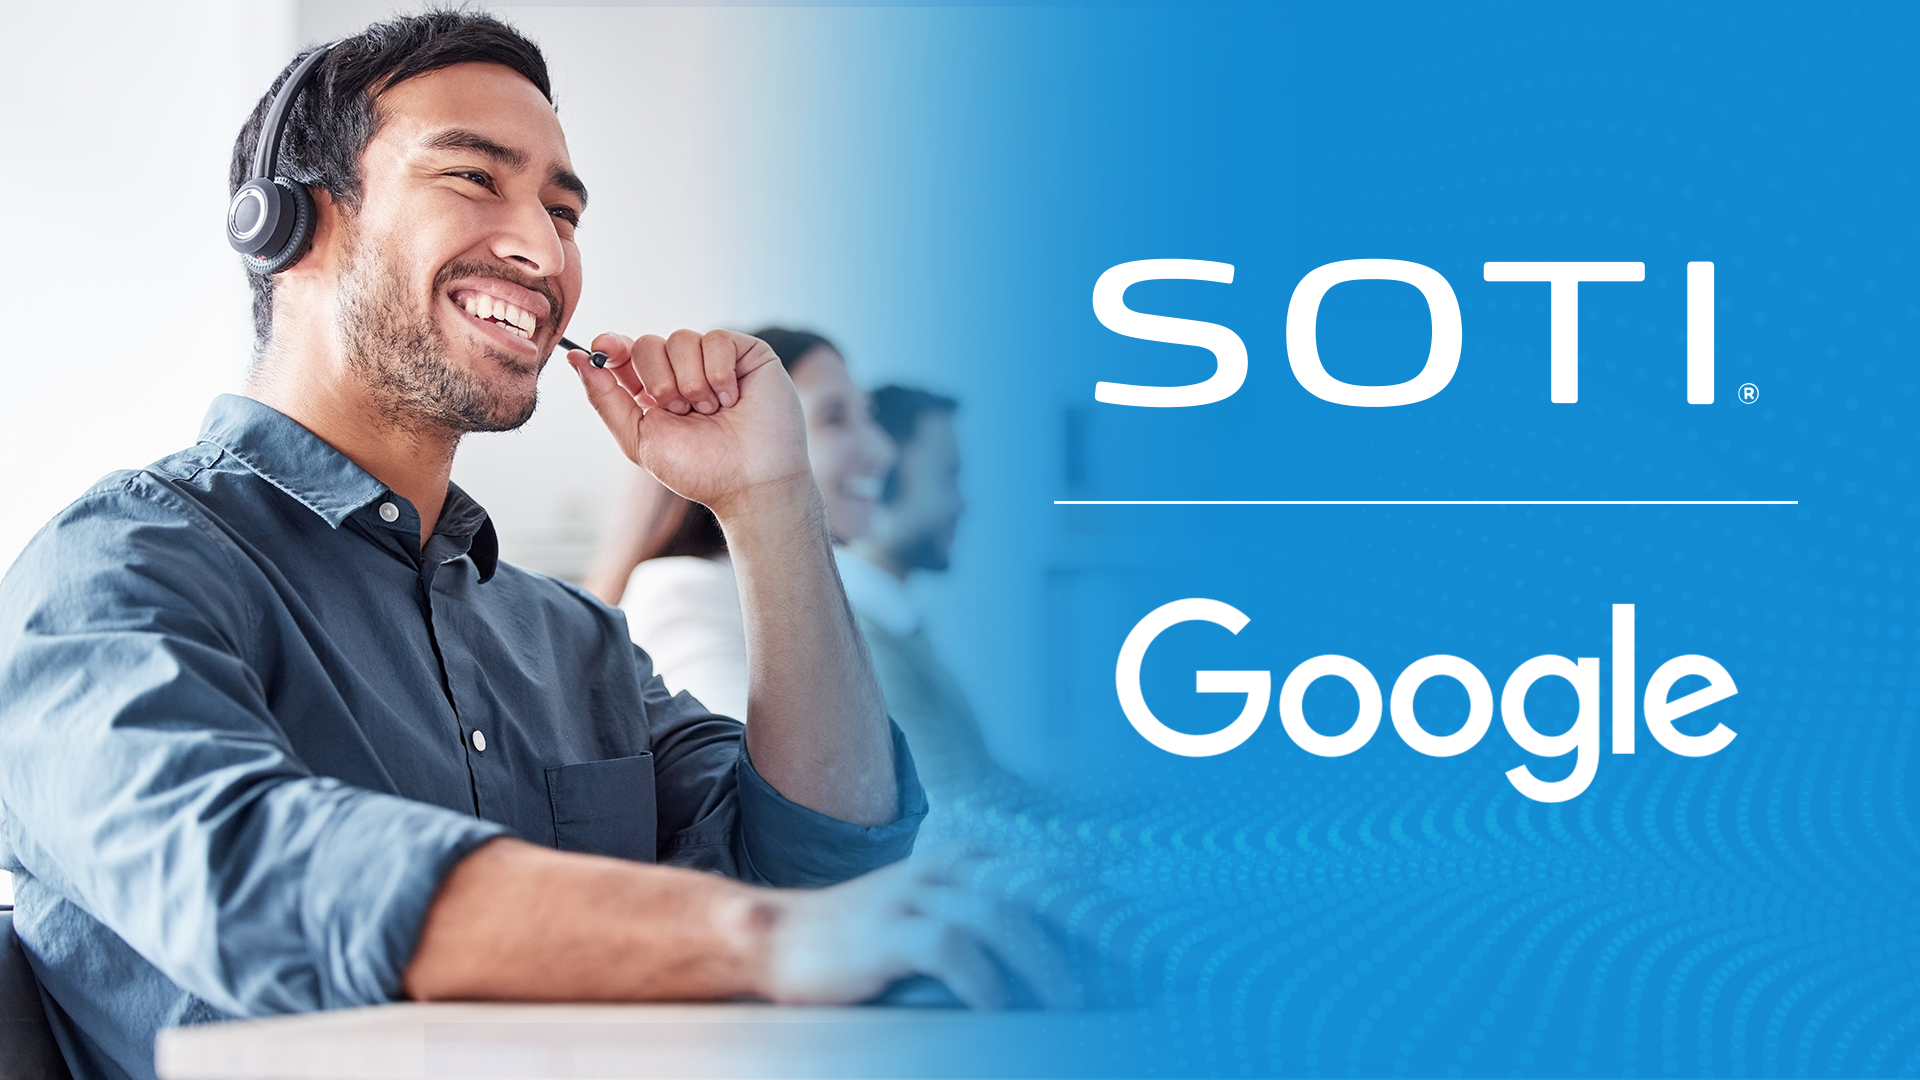 SOTI Leads The Way Globally With The Most Google Android Enterprise Certified Experts